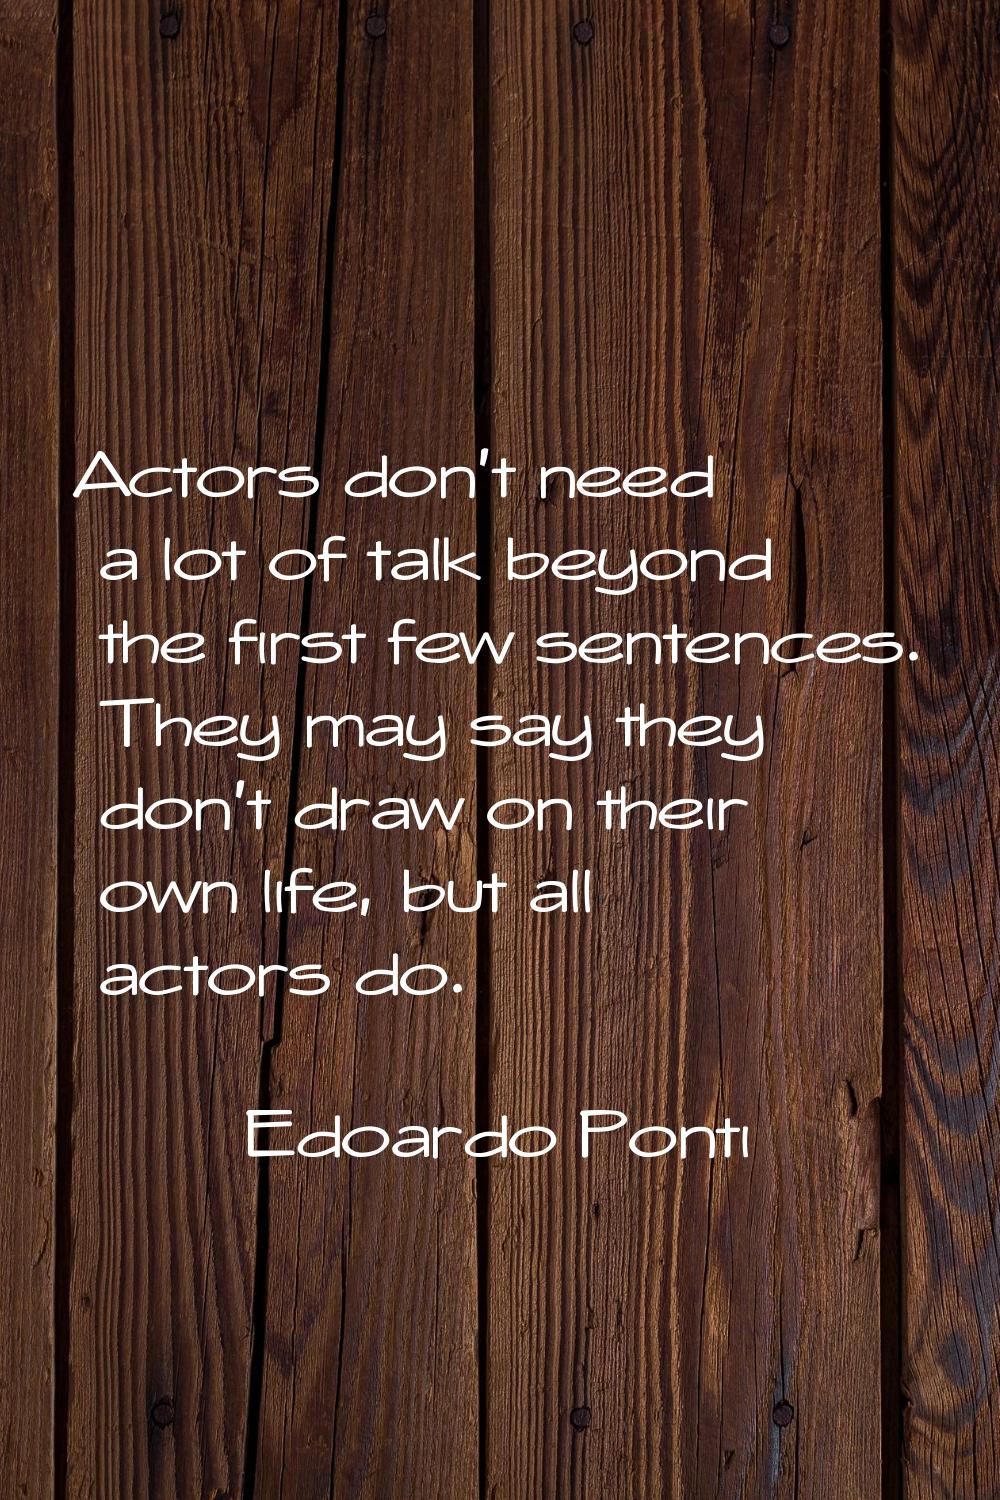 Actors don't need a lot of talk beyond the first few sentences. They may say they don't draw on the